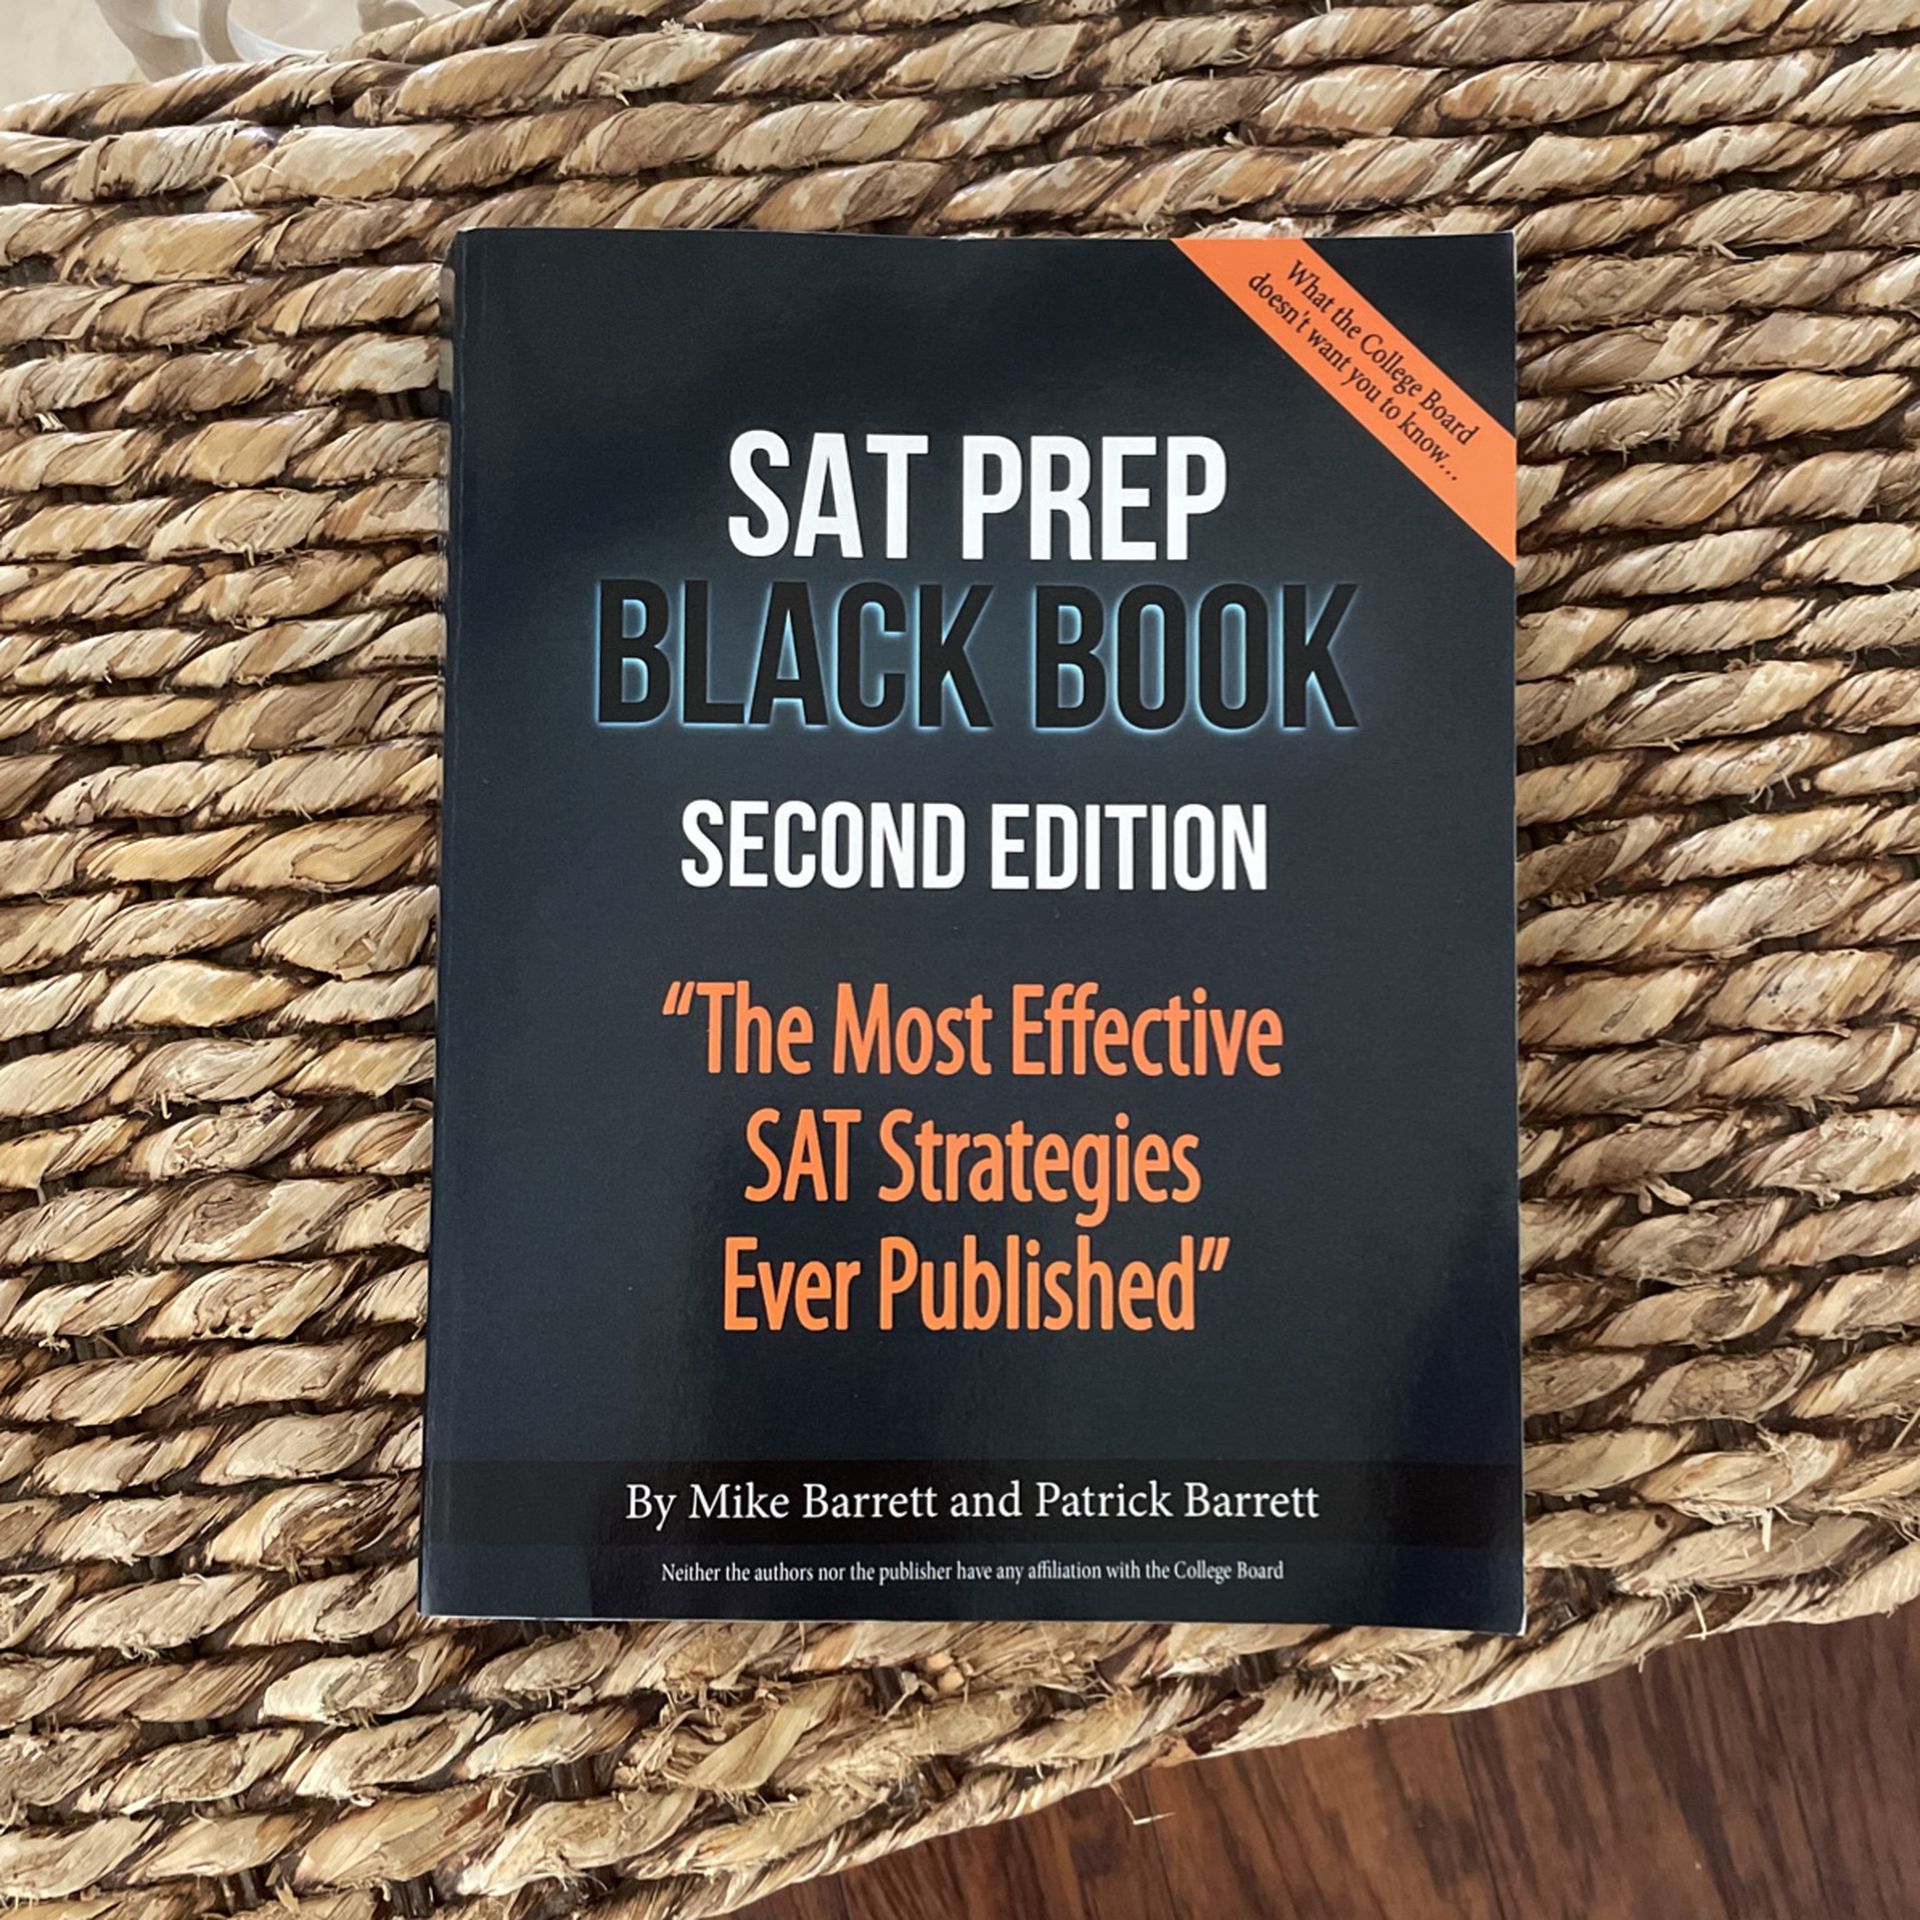 New SAT Prep Black Book Second Edition In Weston for Sale in Fort